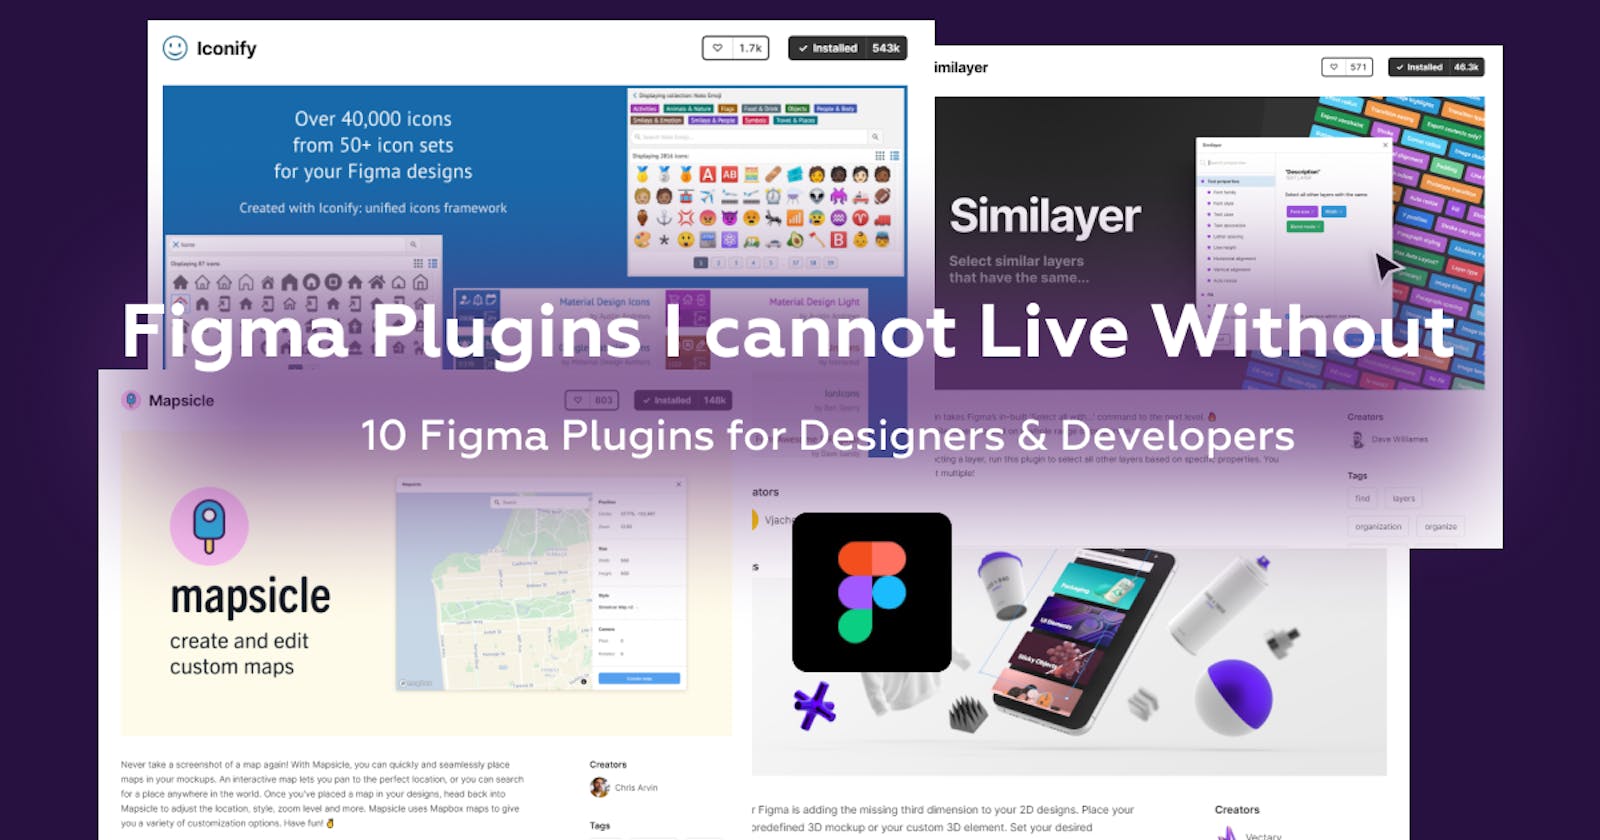 Figma Plugins I cannot Live Without